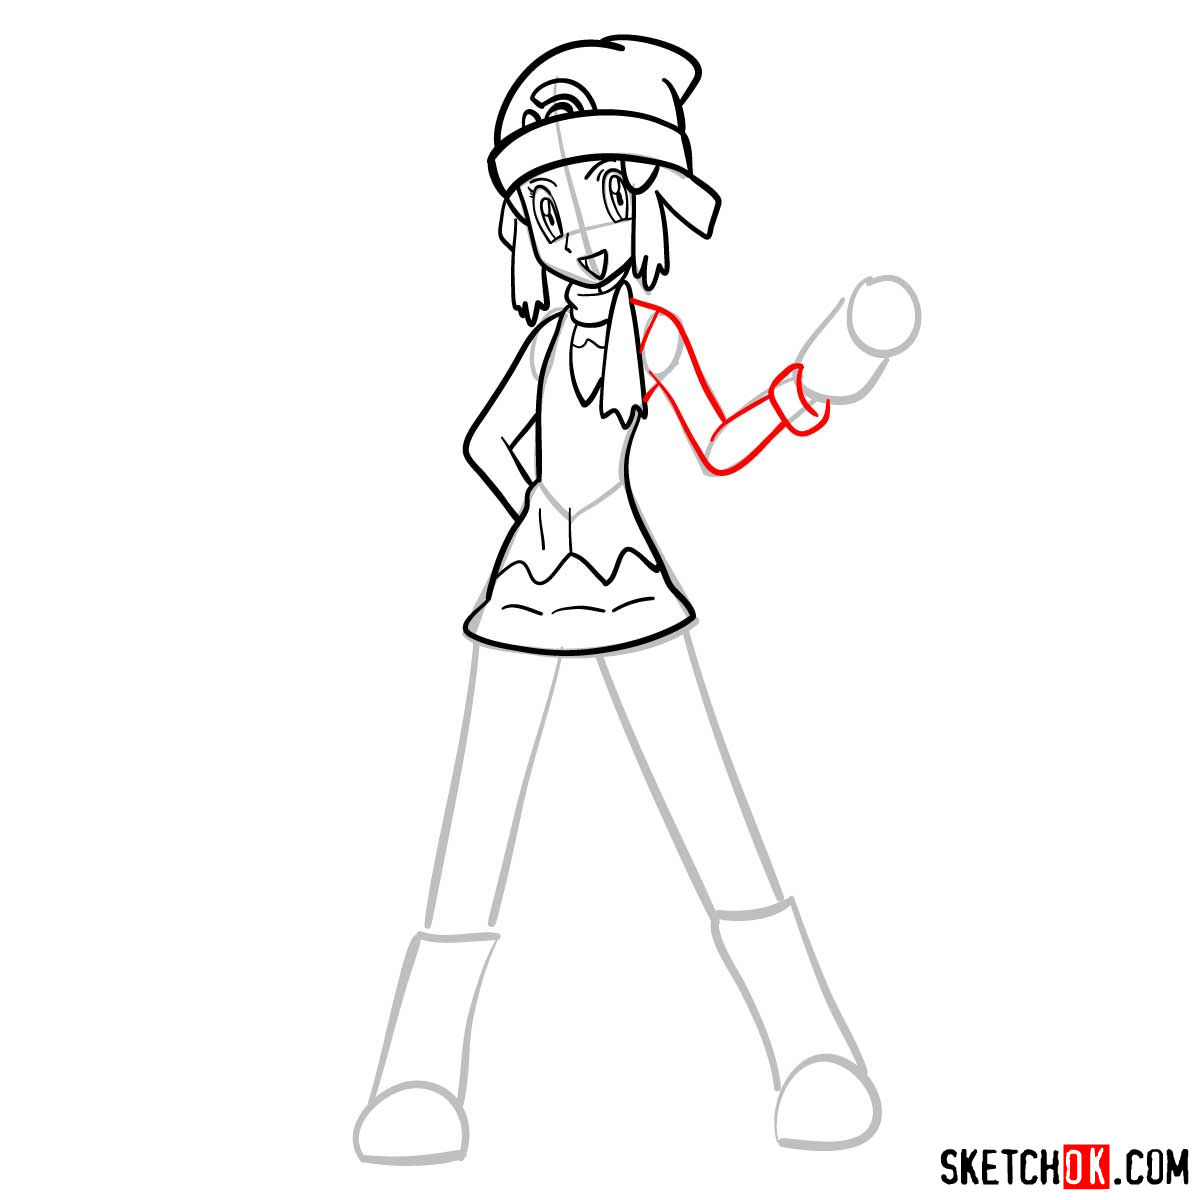 How to draw Dawn from Pokemon anime - step 11